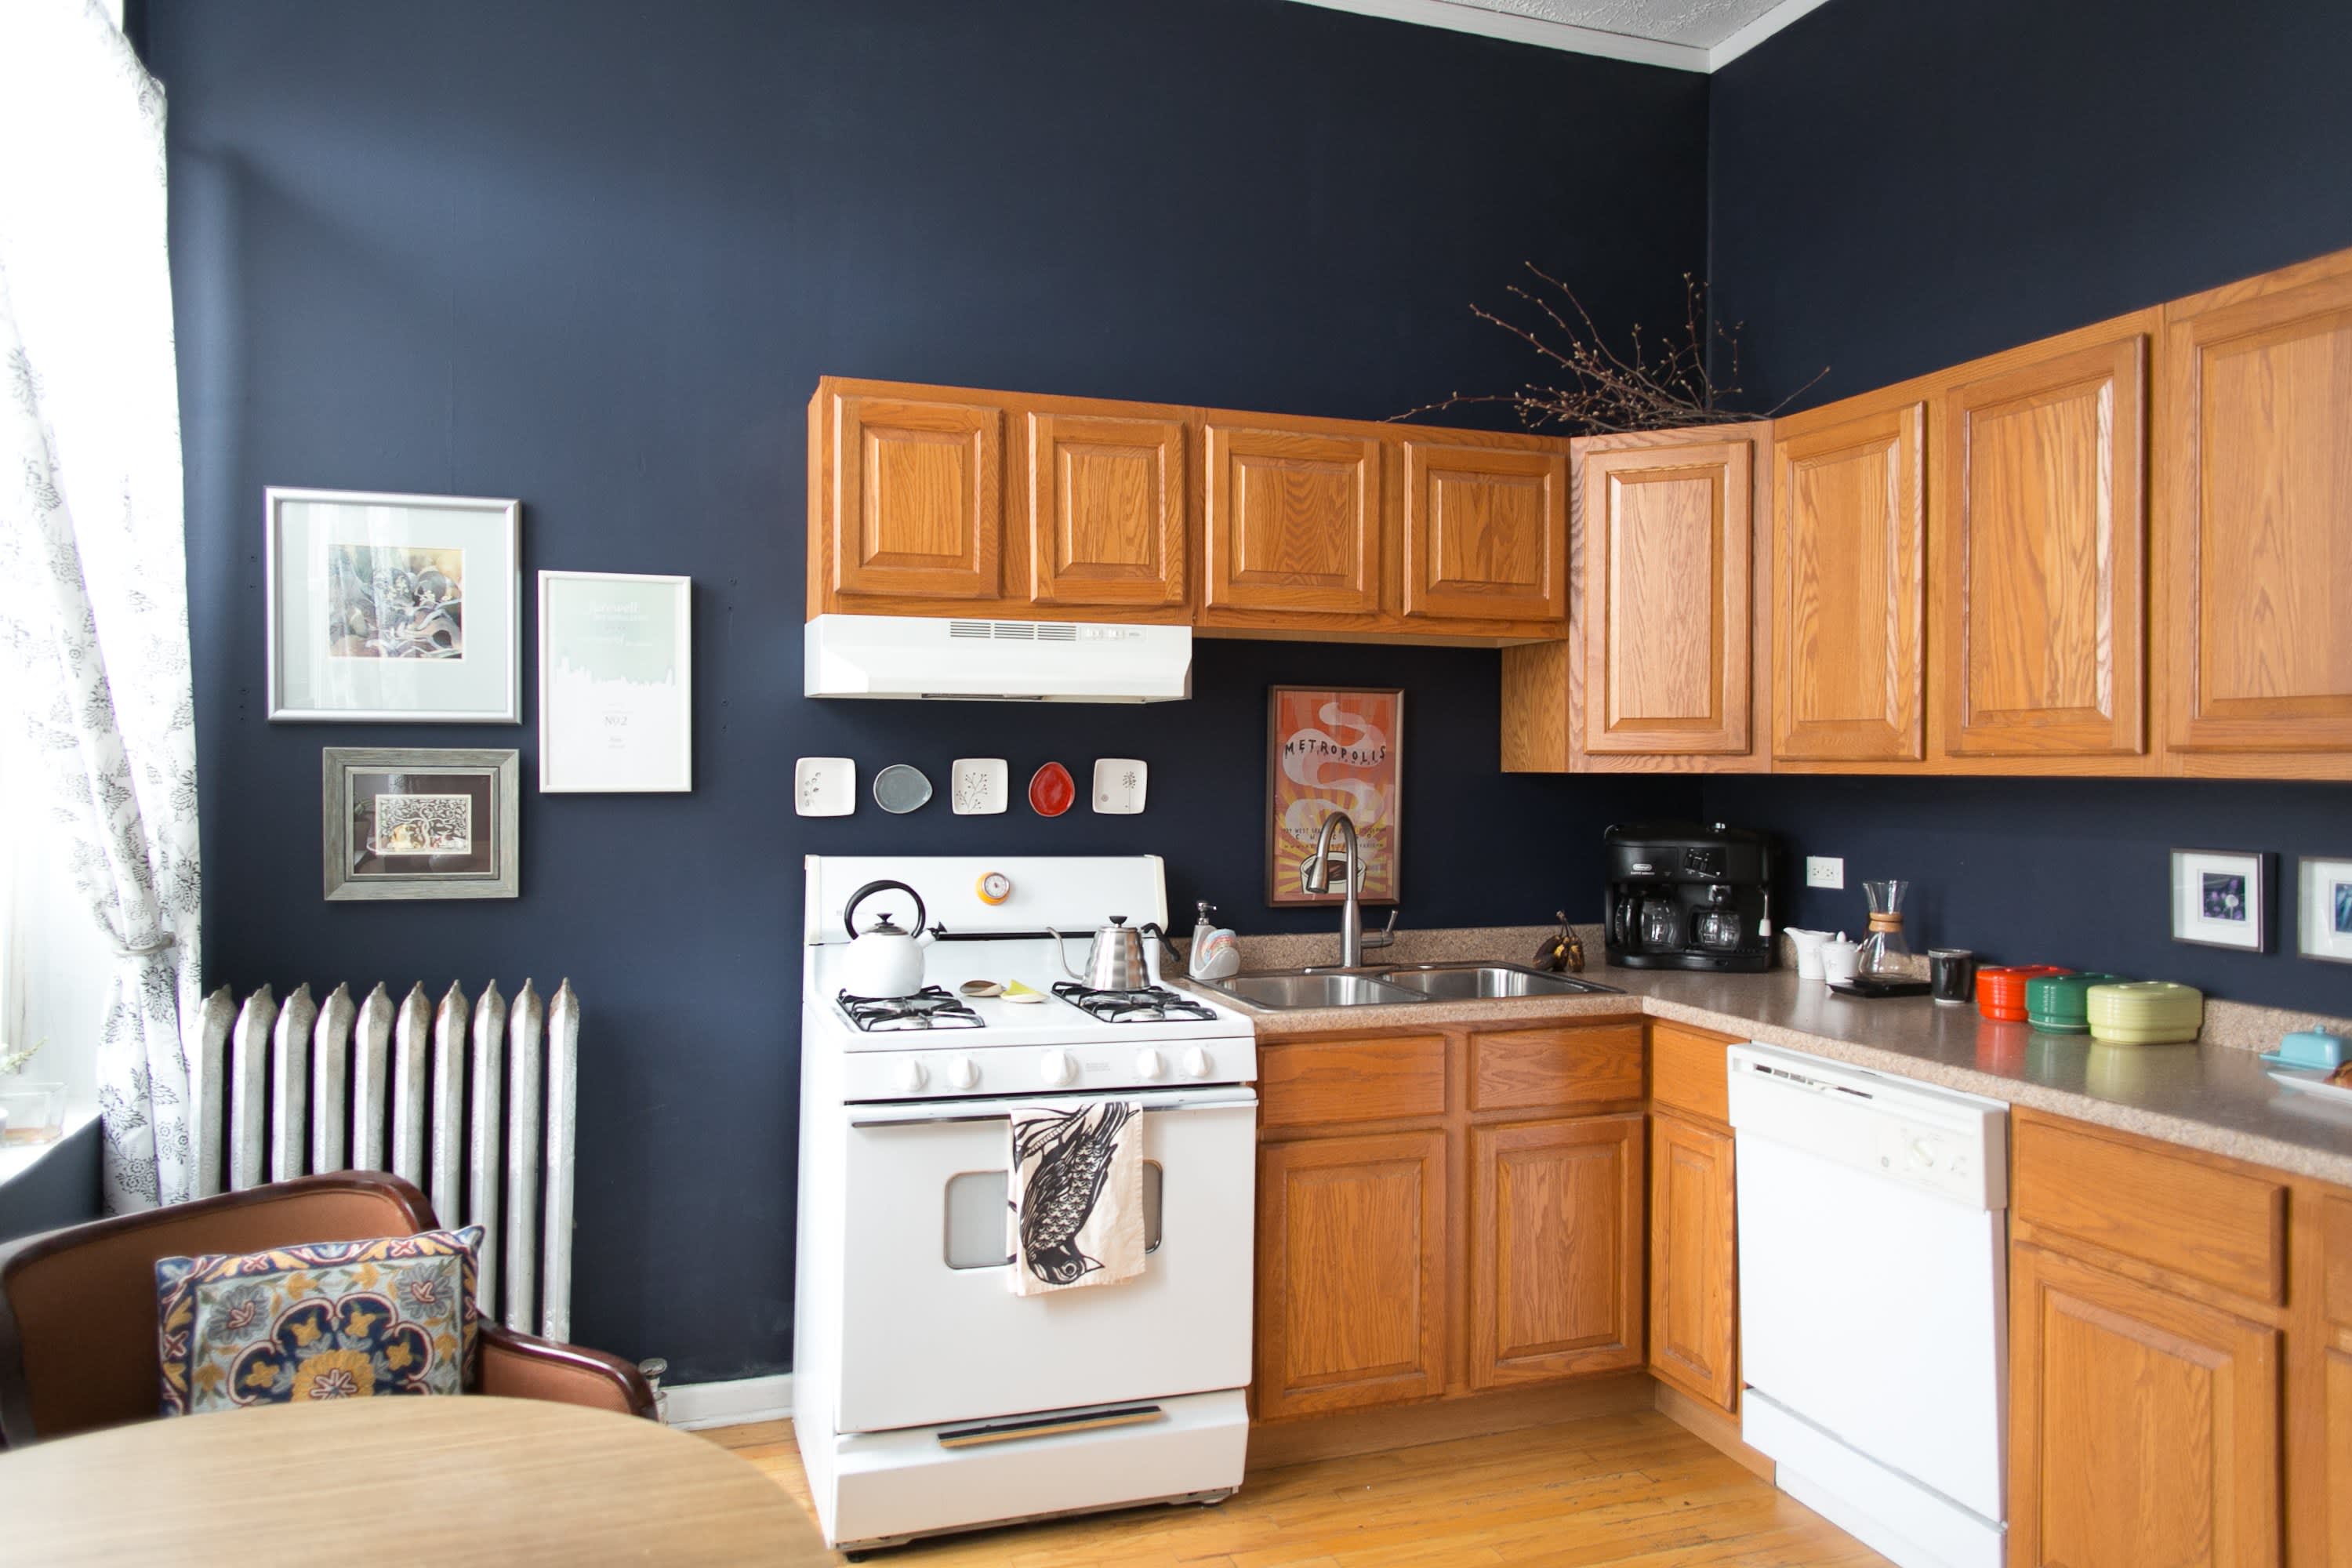 kitchen color ideas with oak cabinets and black appliances